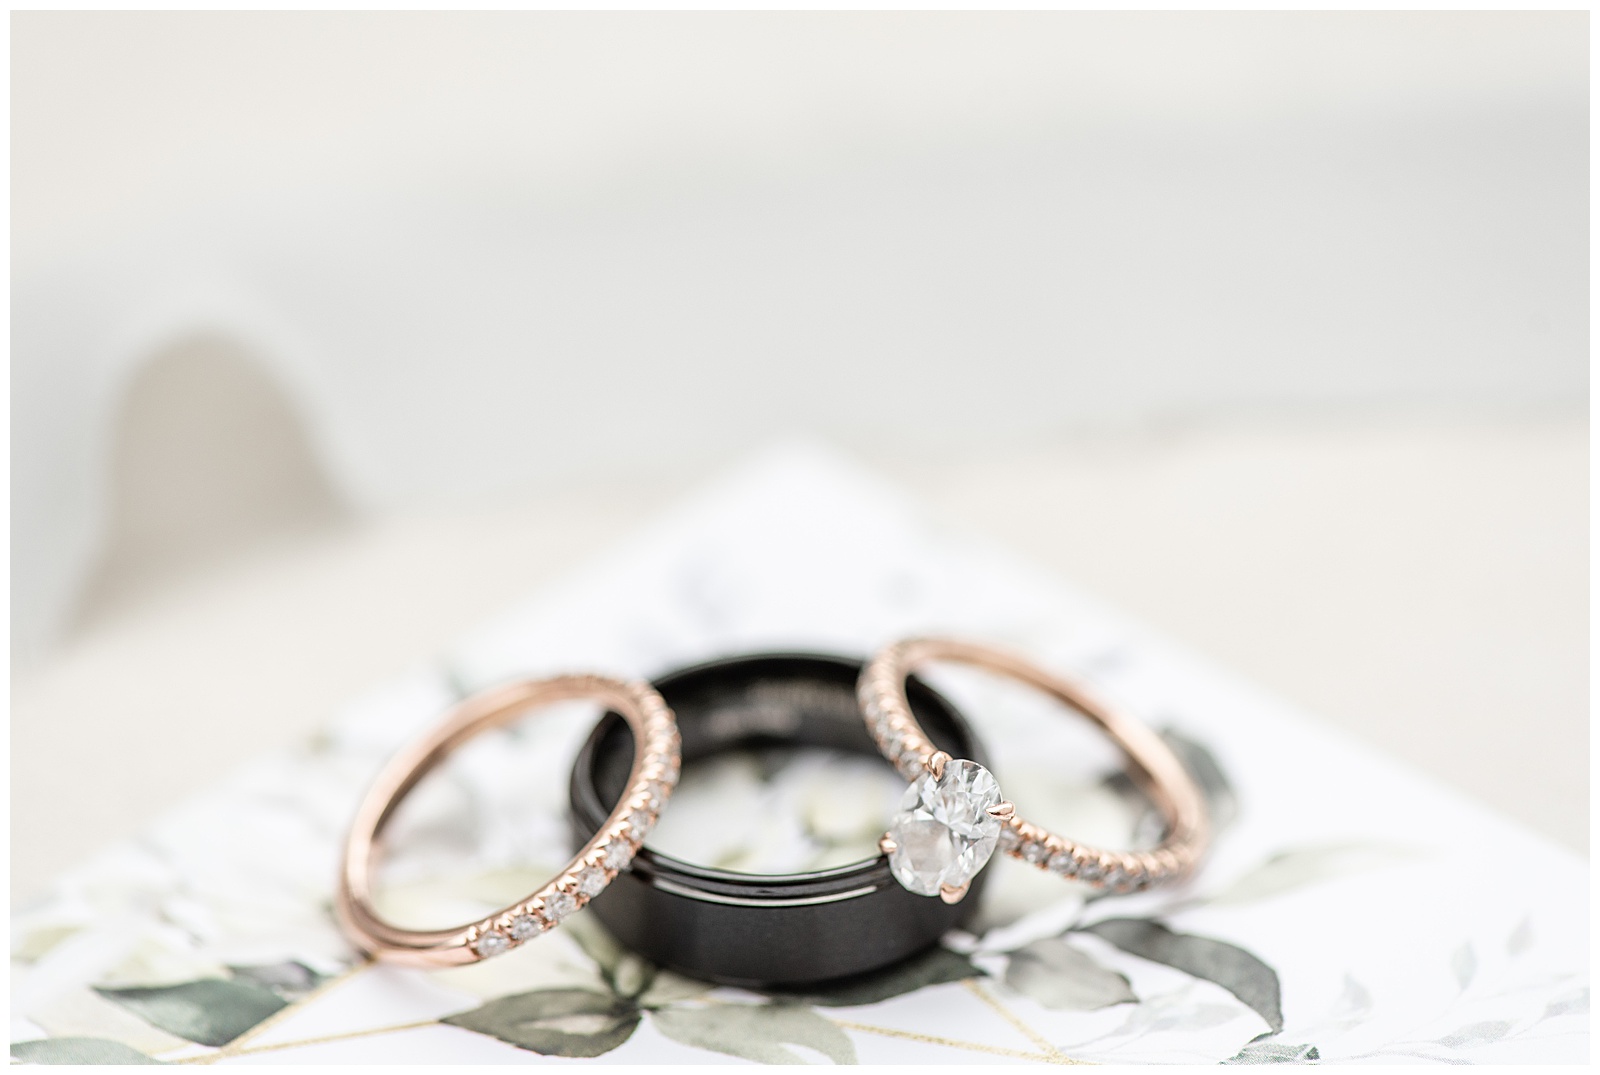 gold diamond engagement ring and diamond wedding band resting on groom's black wedding ring at lakefield weddings